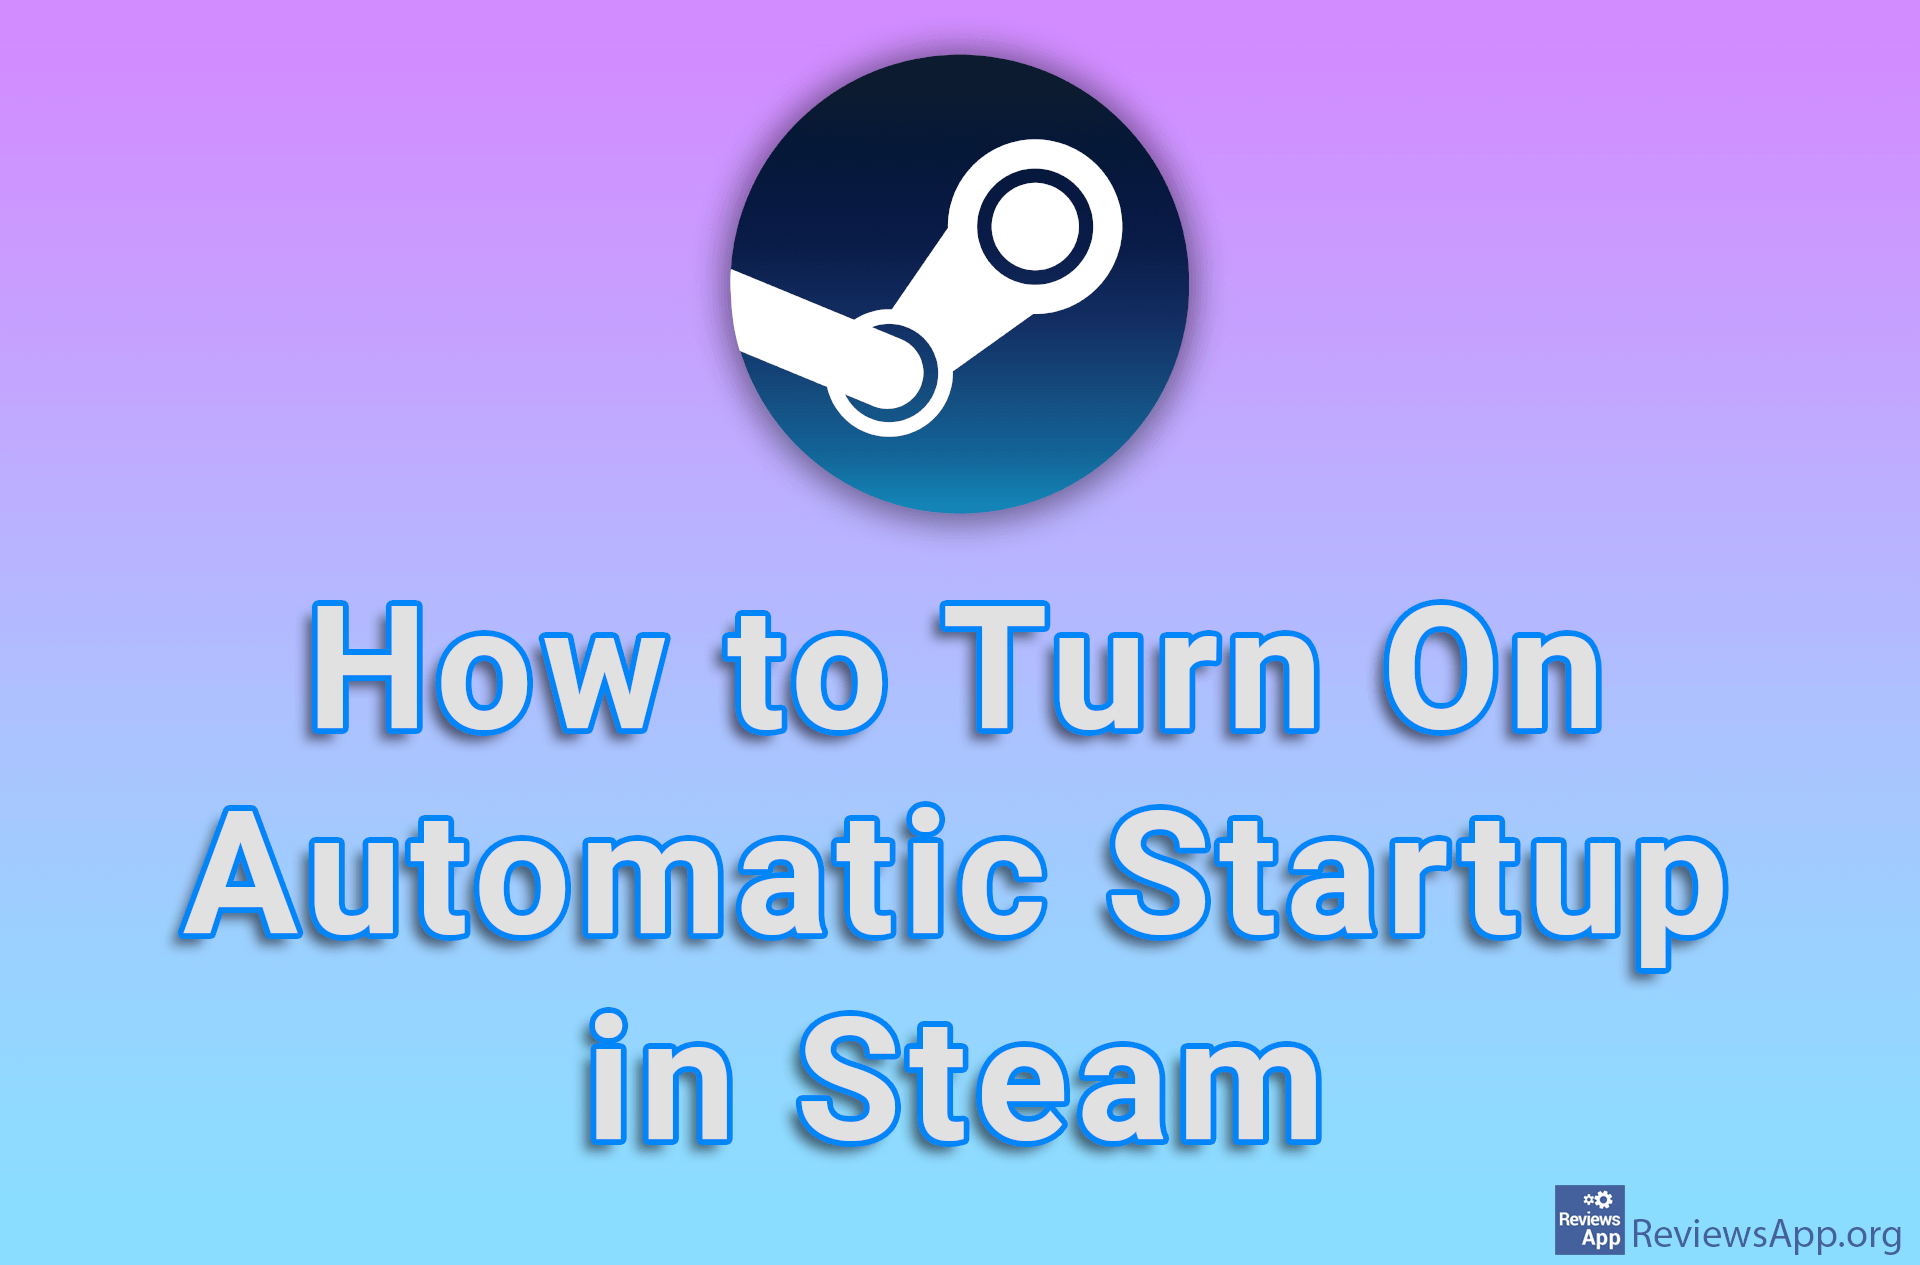 How to Turn On Automatic Startup in Steam